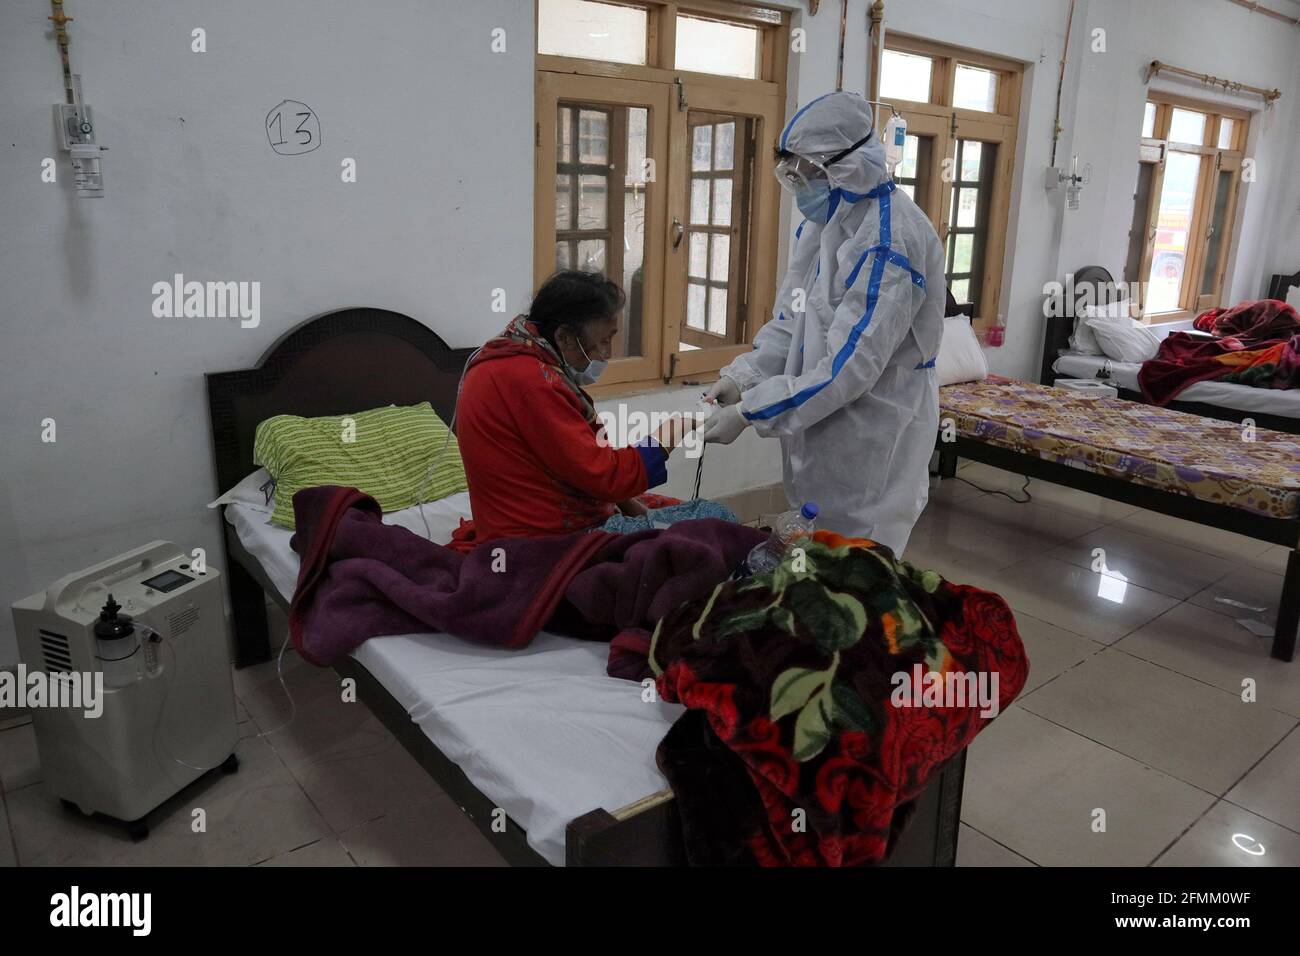 May 8, 2021: A Health worker examins a Covid-19 patient at a temporary Covid-19 hospital in Srinagar, Indian Administered Kashmir on 08 May 2021. A Local NGO Athrout has converted Hajj house into a 100-bedded Covid centre as the space in hospitals is filling up fast Credit: Muzamil Mattoo/IMAGESLIVE/ZUMA Wire/Alamy Live News Stock Photo